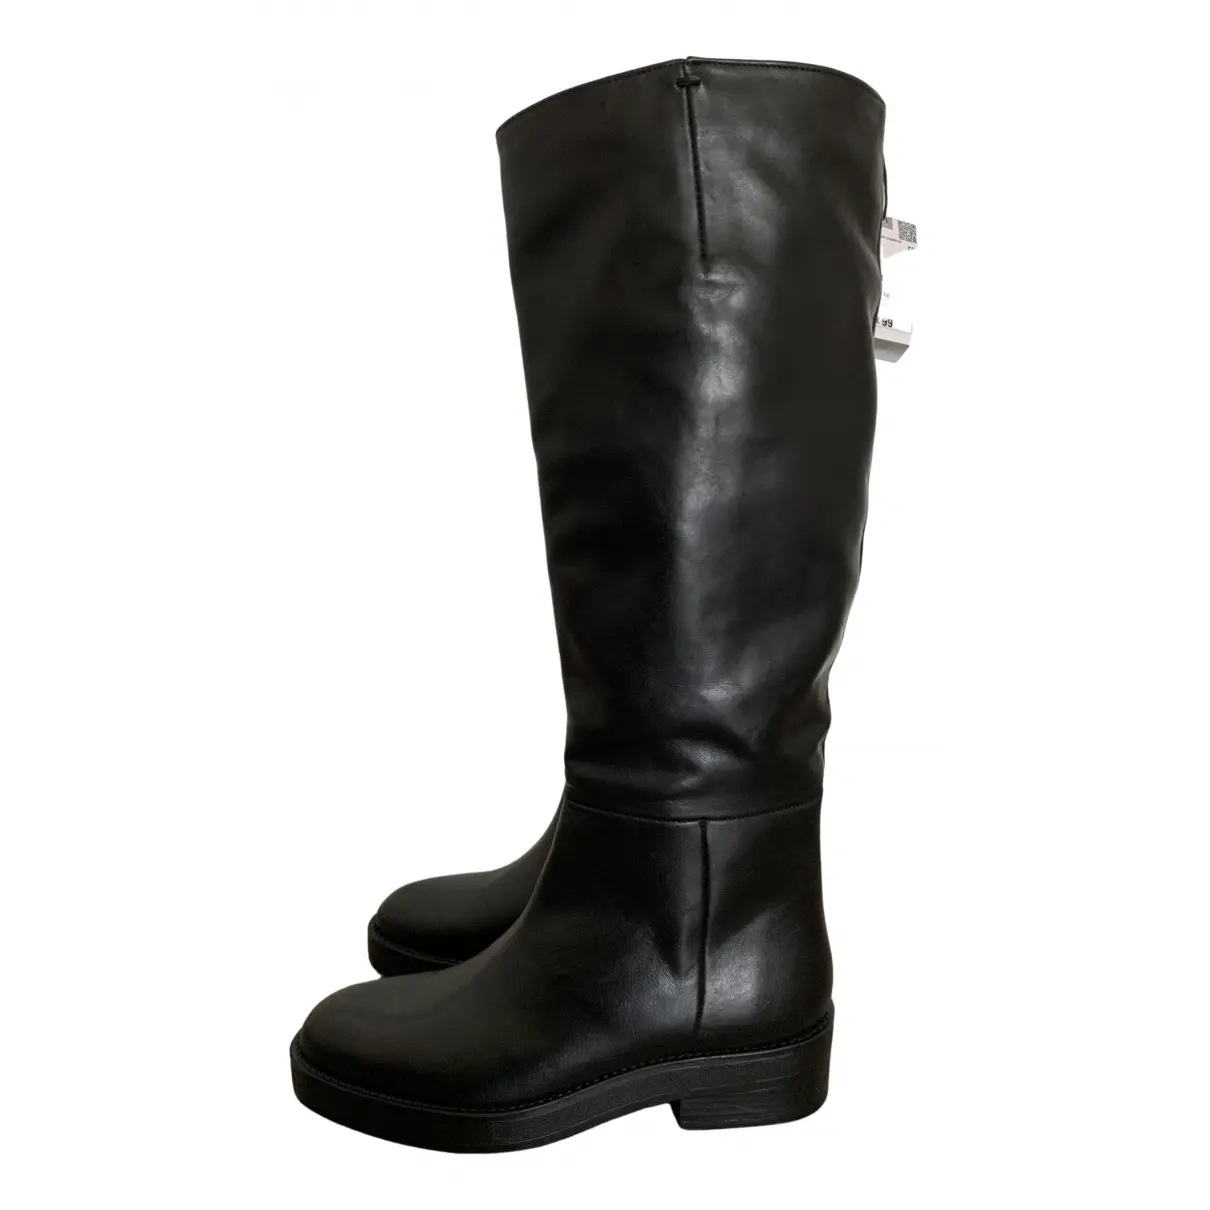 Leather riding boots Zara